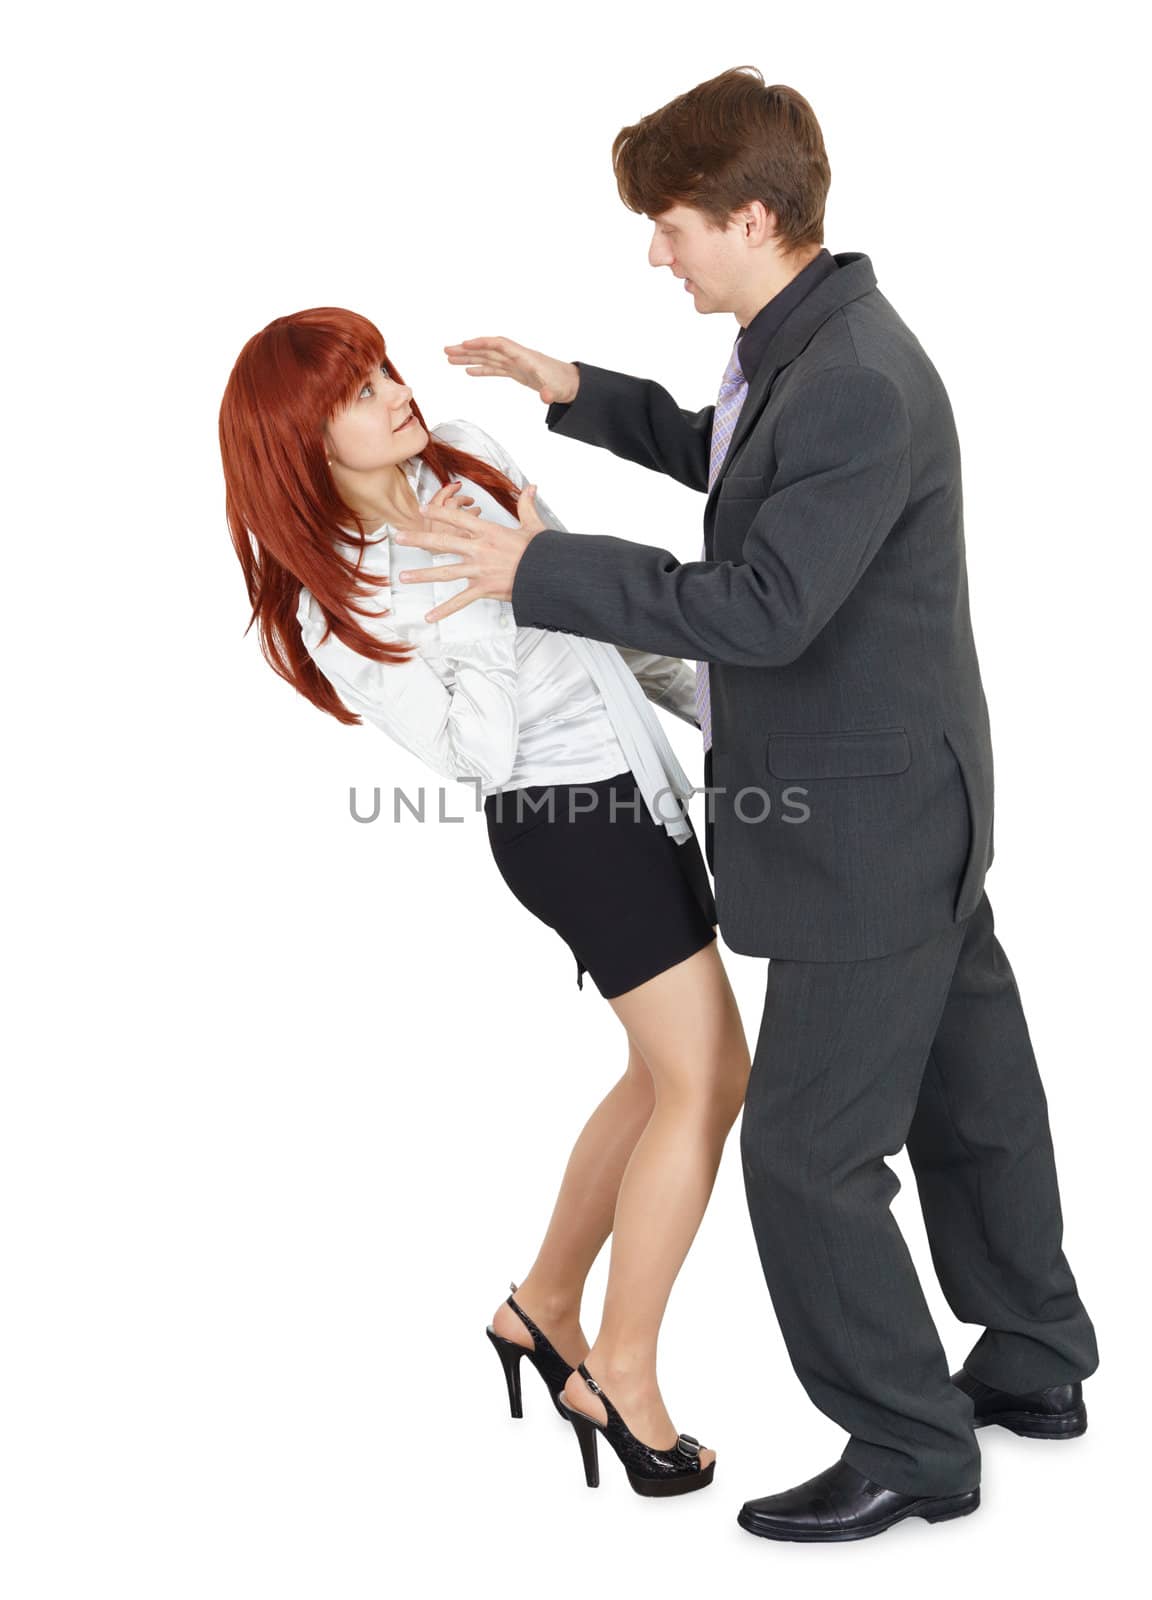 A young man attacks a woman, isolated on a white background